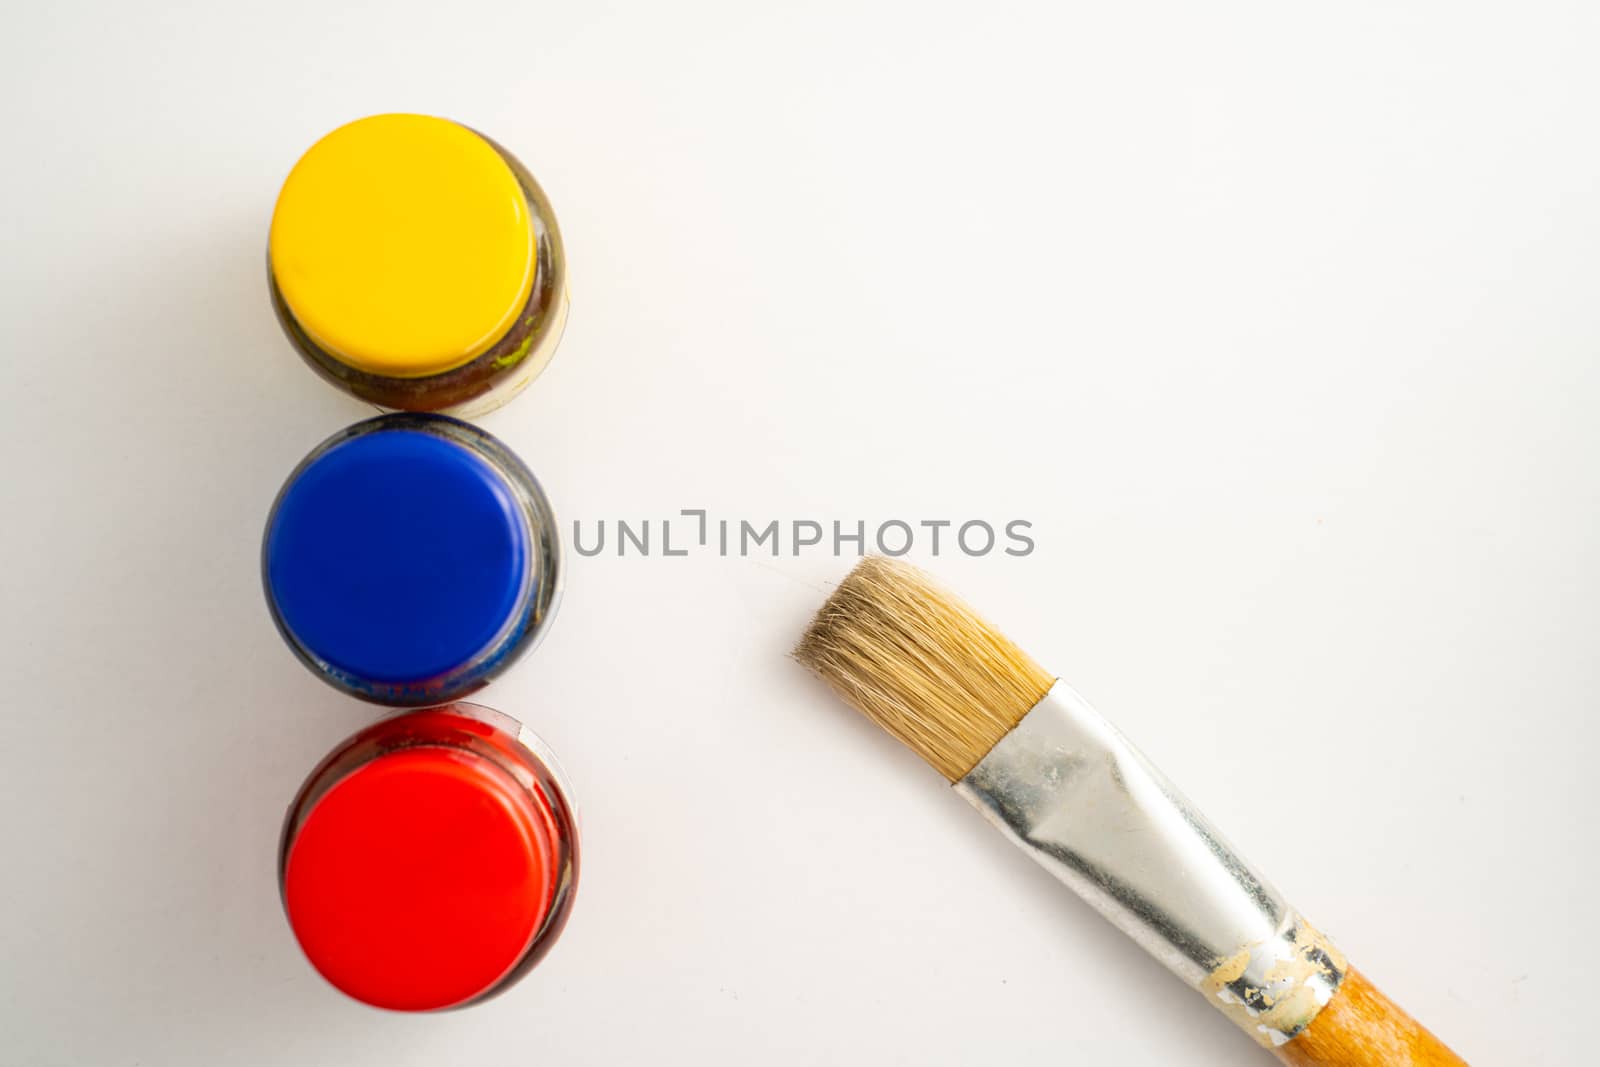 The Top view of bottles of primary color on white background.